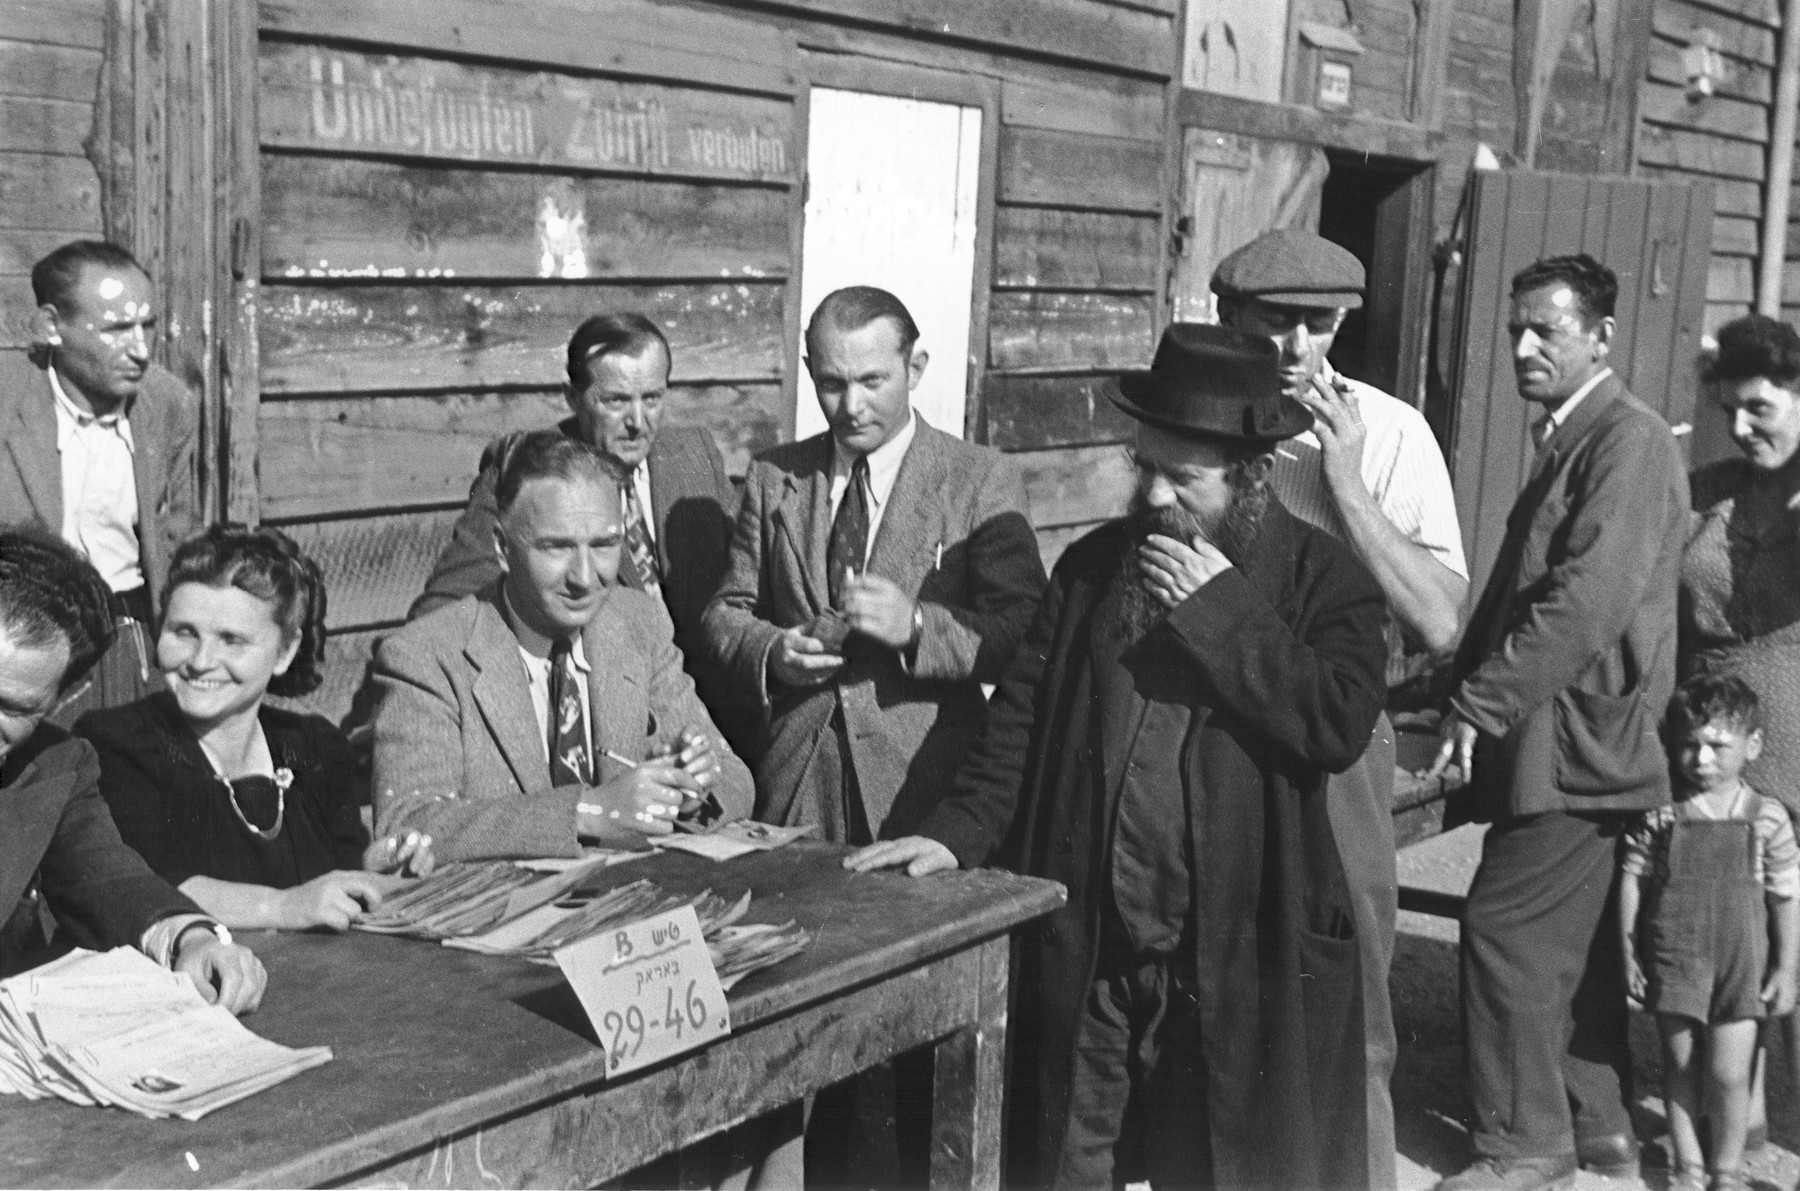 Jewish DPs line up in front of a wooden barracks to register with IRO (International Relief Organization) officials.  

The Hebrew sign on the table reads, "Table B, Barracks 29-46."